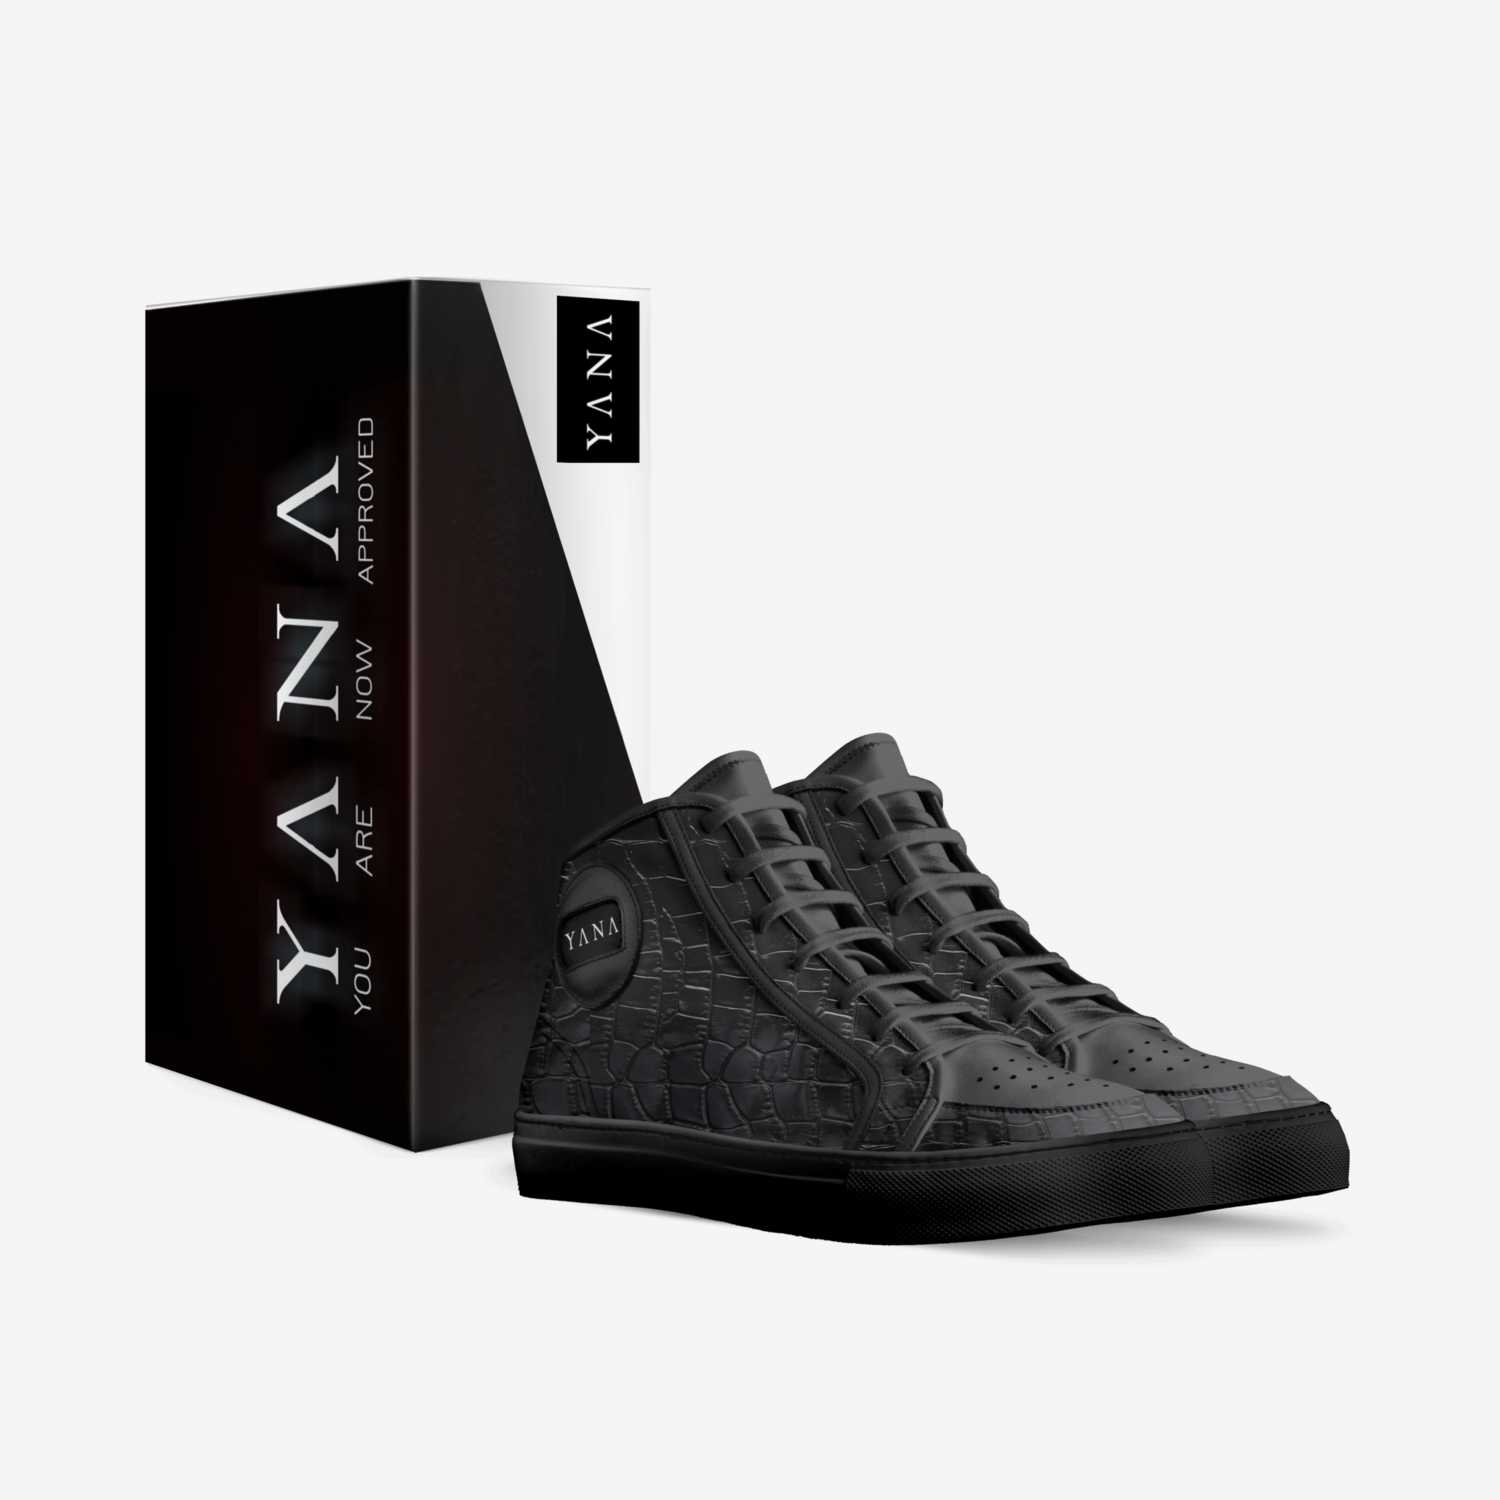 YANA custom made in Italy shoes by William Hicks | Box view